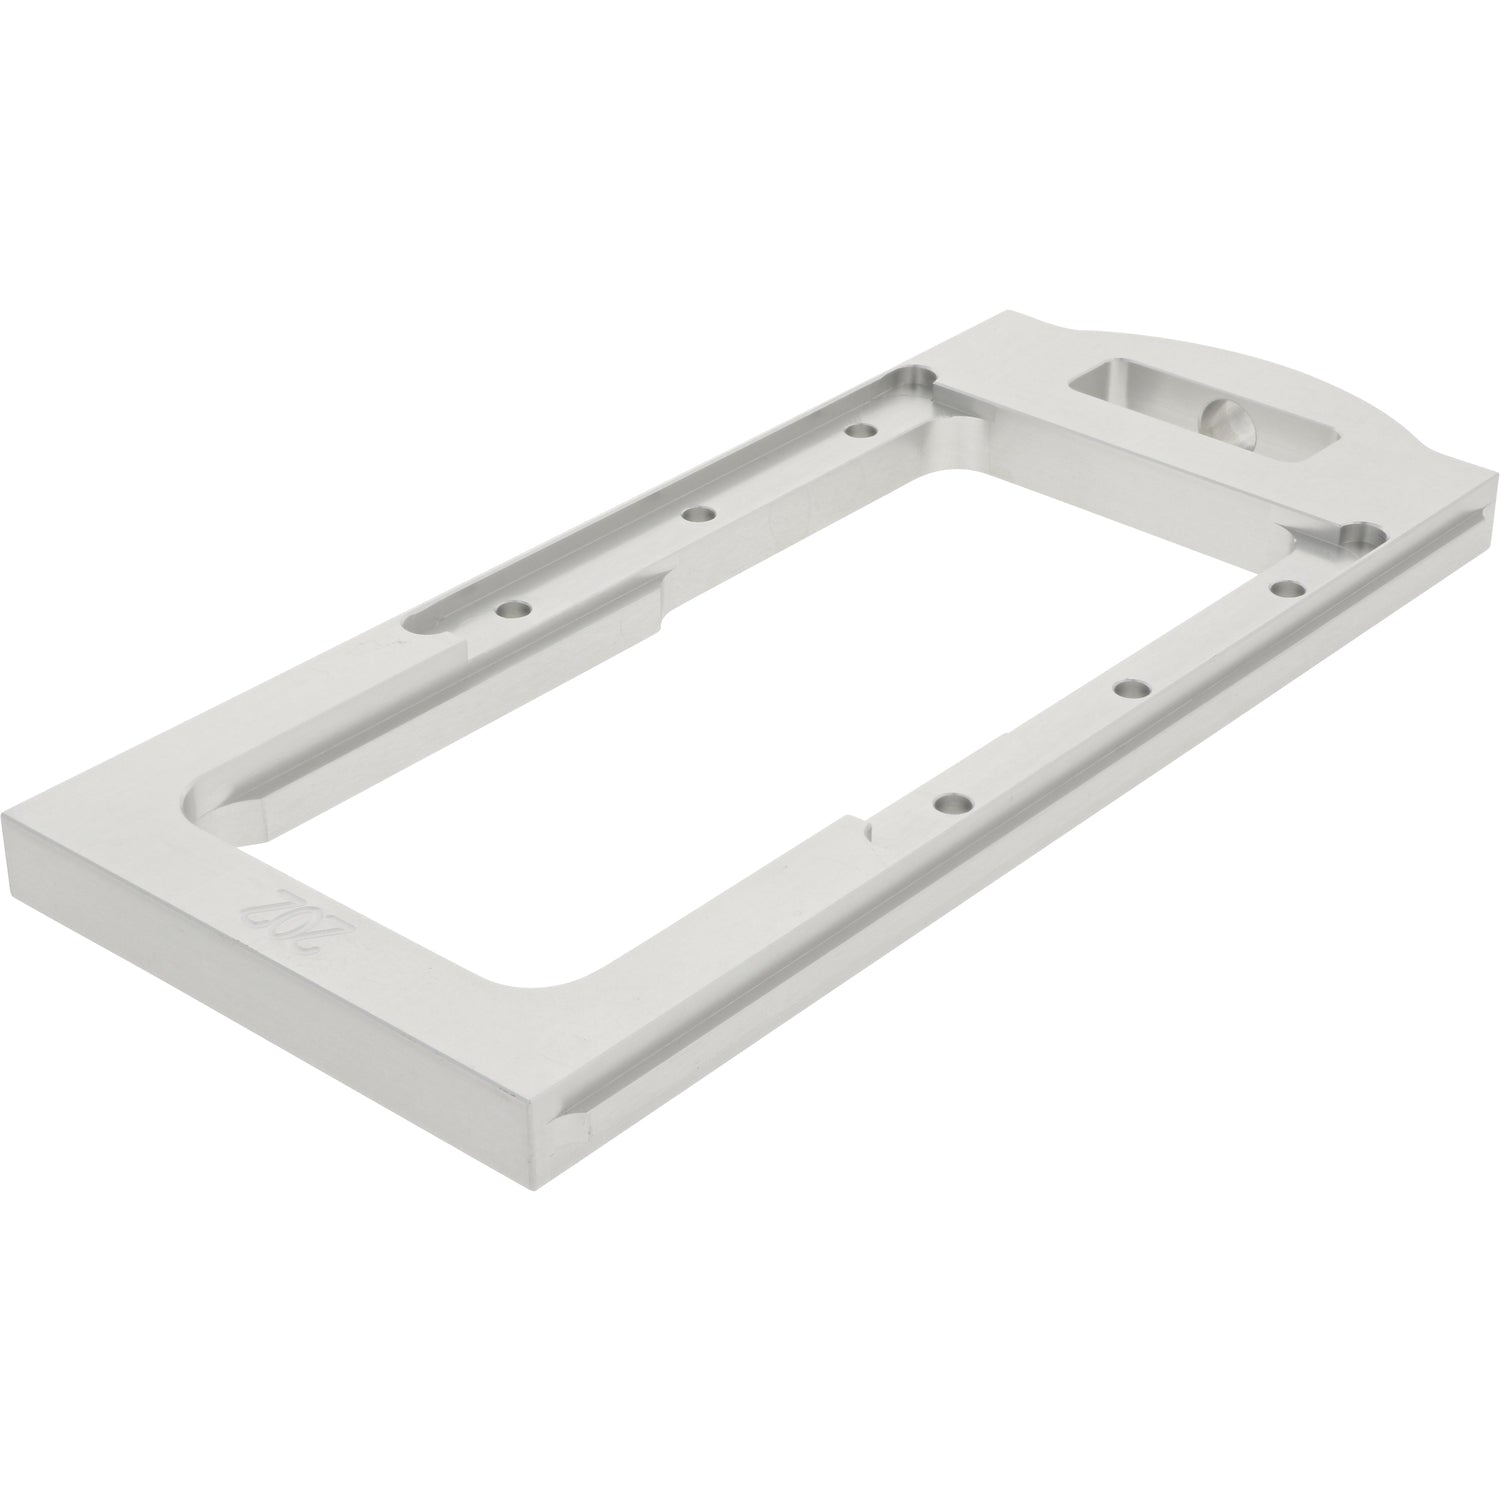 Gray aluminum rectangular part with center cut out and multiple through holes. on a white background.